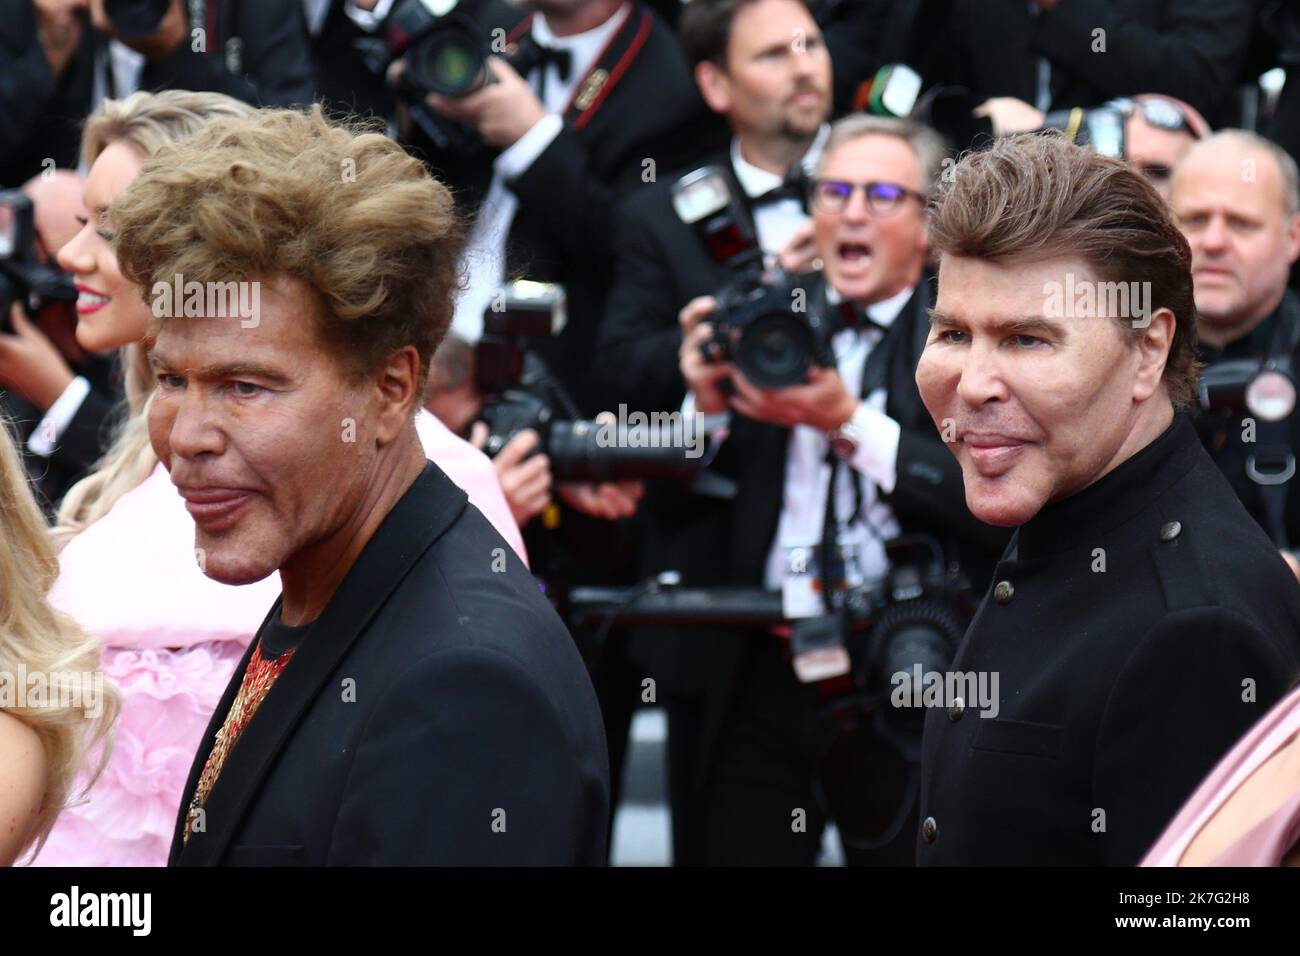 ©Pierre Teyssot/MAXPPP ; FILE PICTURE - Cannes Film Festival 2018 - 71st edition - Day 8 - May 15 in Cannes, on May 15, 2018; Screening of 'Solo: A star Wars Story; Grichka Bogdanoff is died on the 28th of December 201, in Paris at the age of 72, probably from Covid-19. On the red carpet, posing for photographer, Grichka Bogdanoff (right) and left his brother Igor Bogdanoff. Â© Pierre Teyssot / Maxppp  Stock Photo